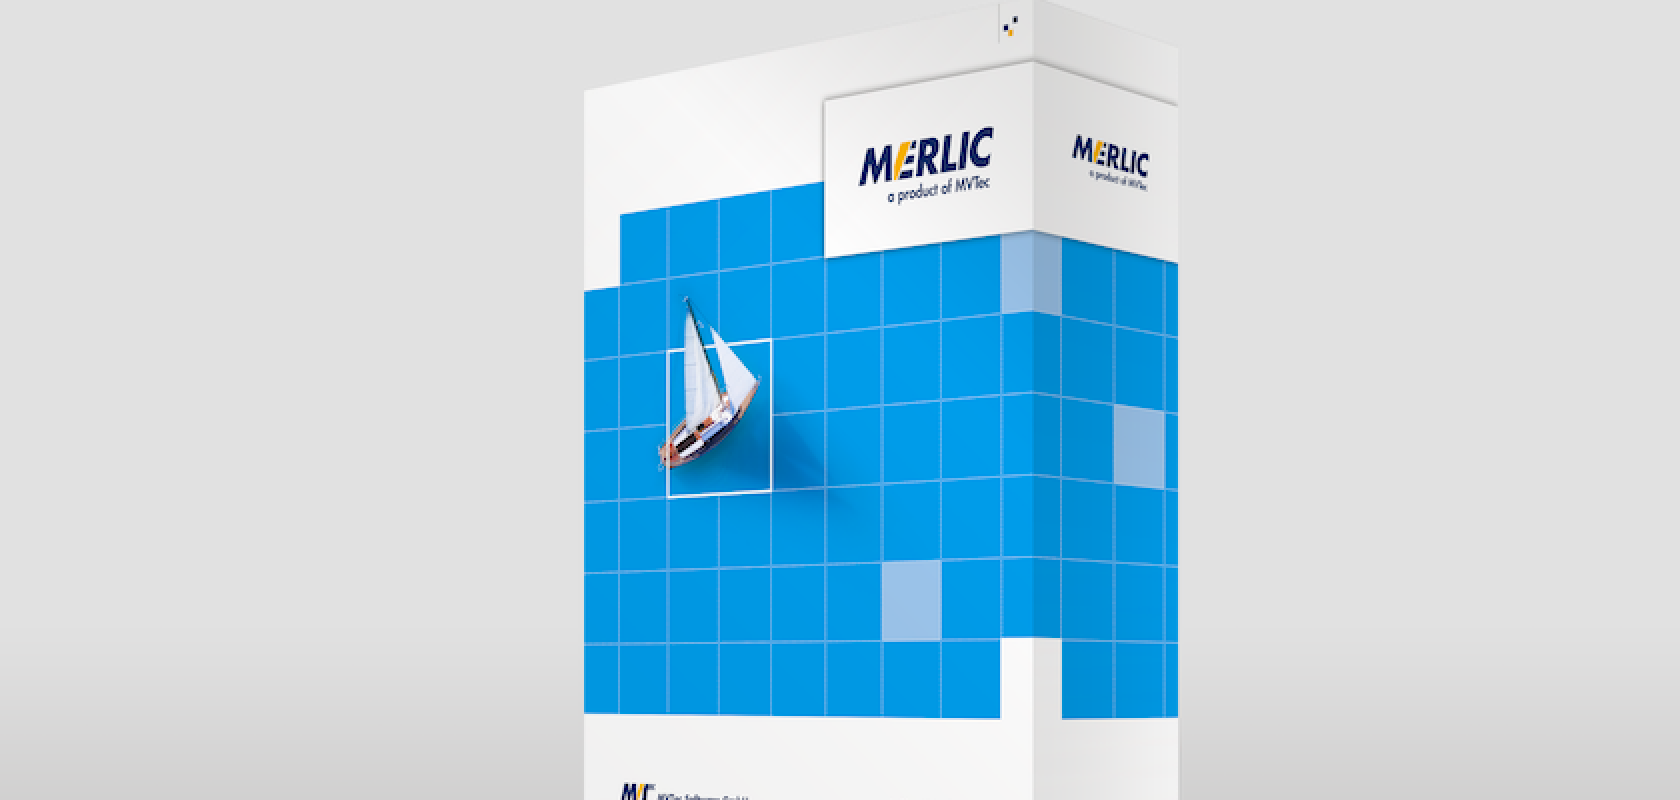 MVTec's MERLIC 5.5 is a no-code software for users with little or no experience in machine vision (Image: MVTec)